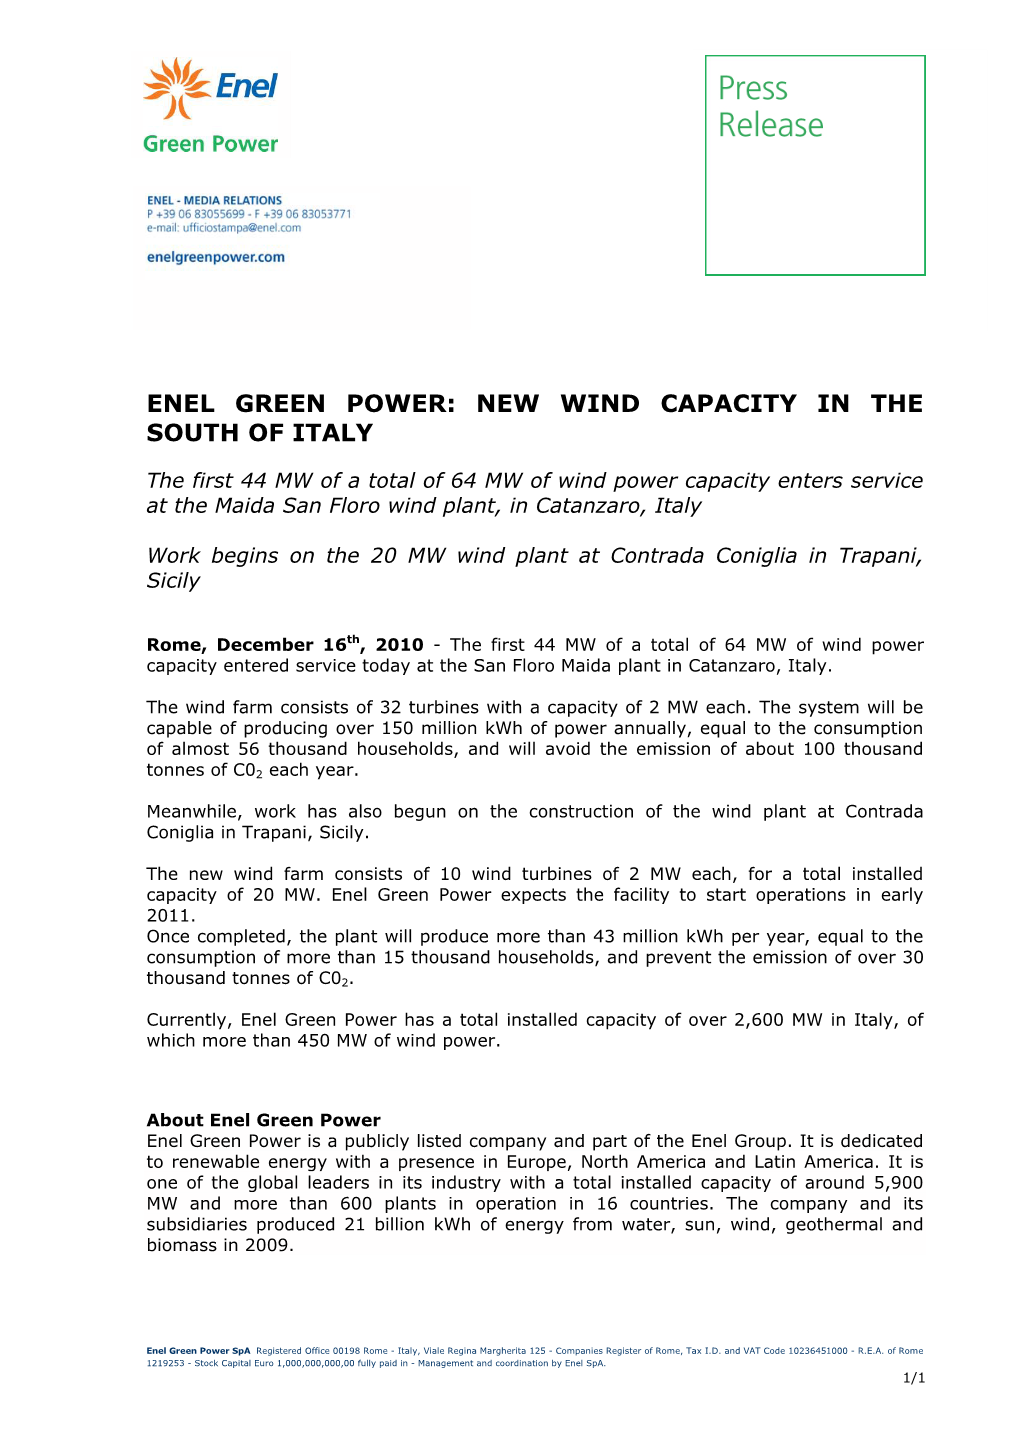 Enel Green Power: New Wind Capacity in the South of Italy